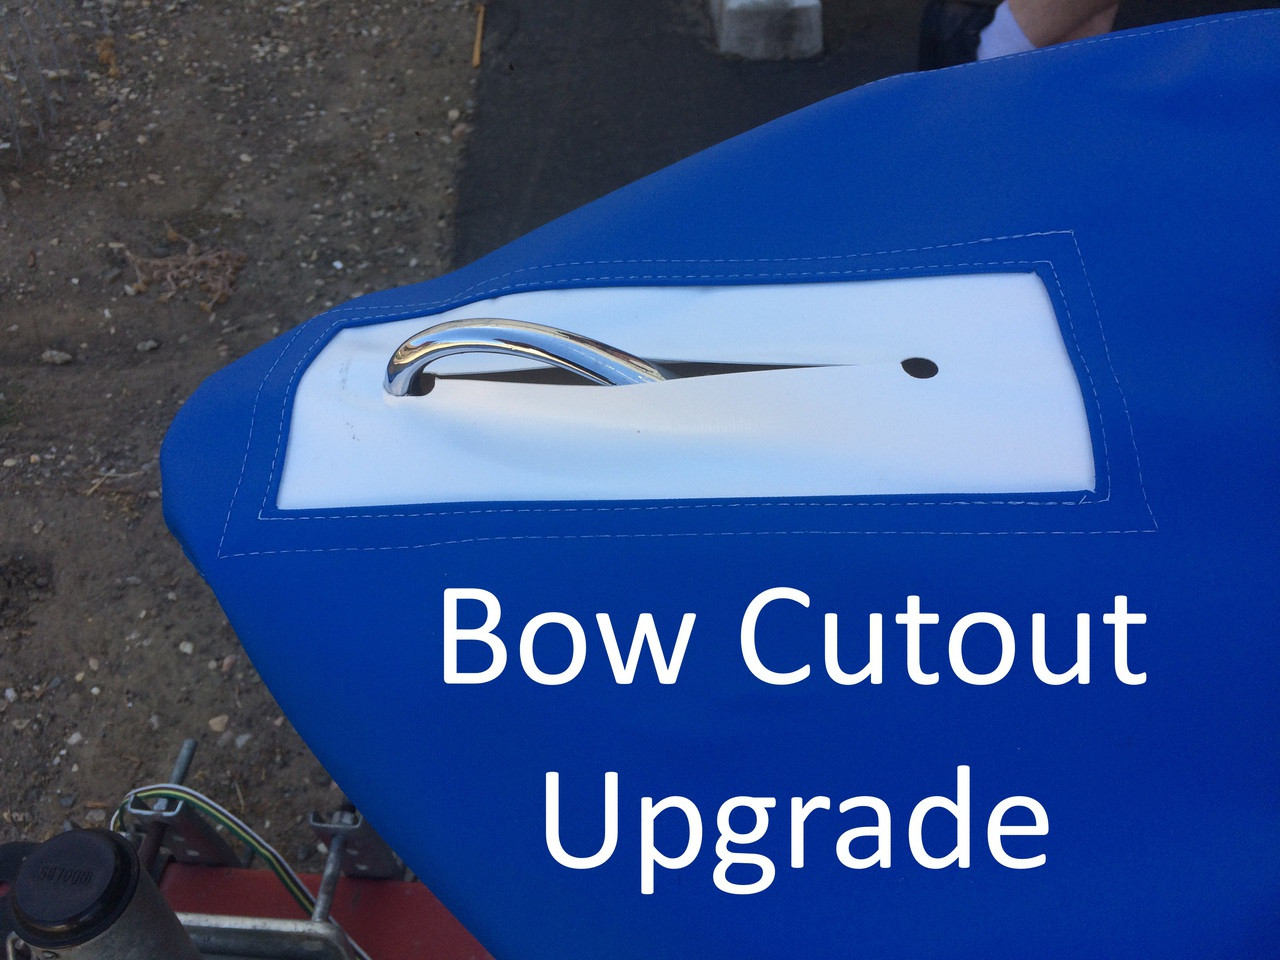 Optional Upgrade: Add a Bow Cutout for easy access to your bow handle. 
